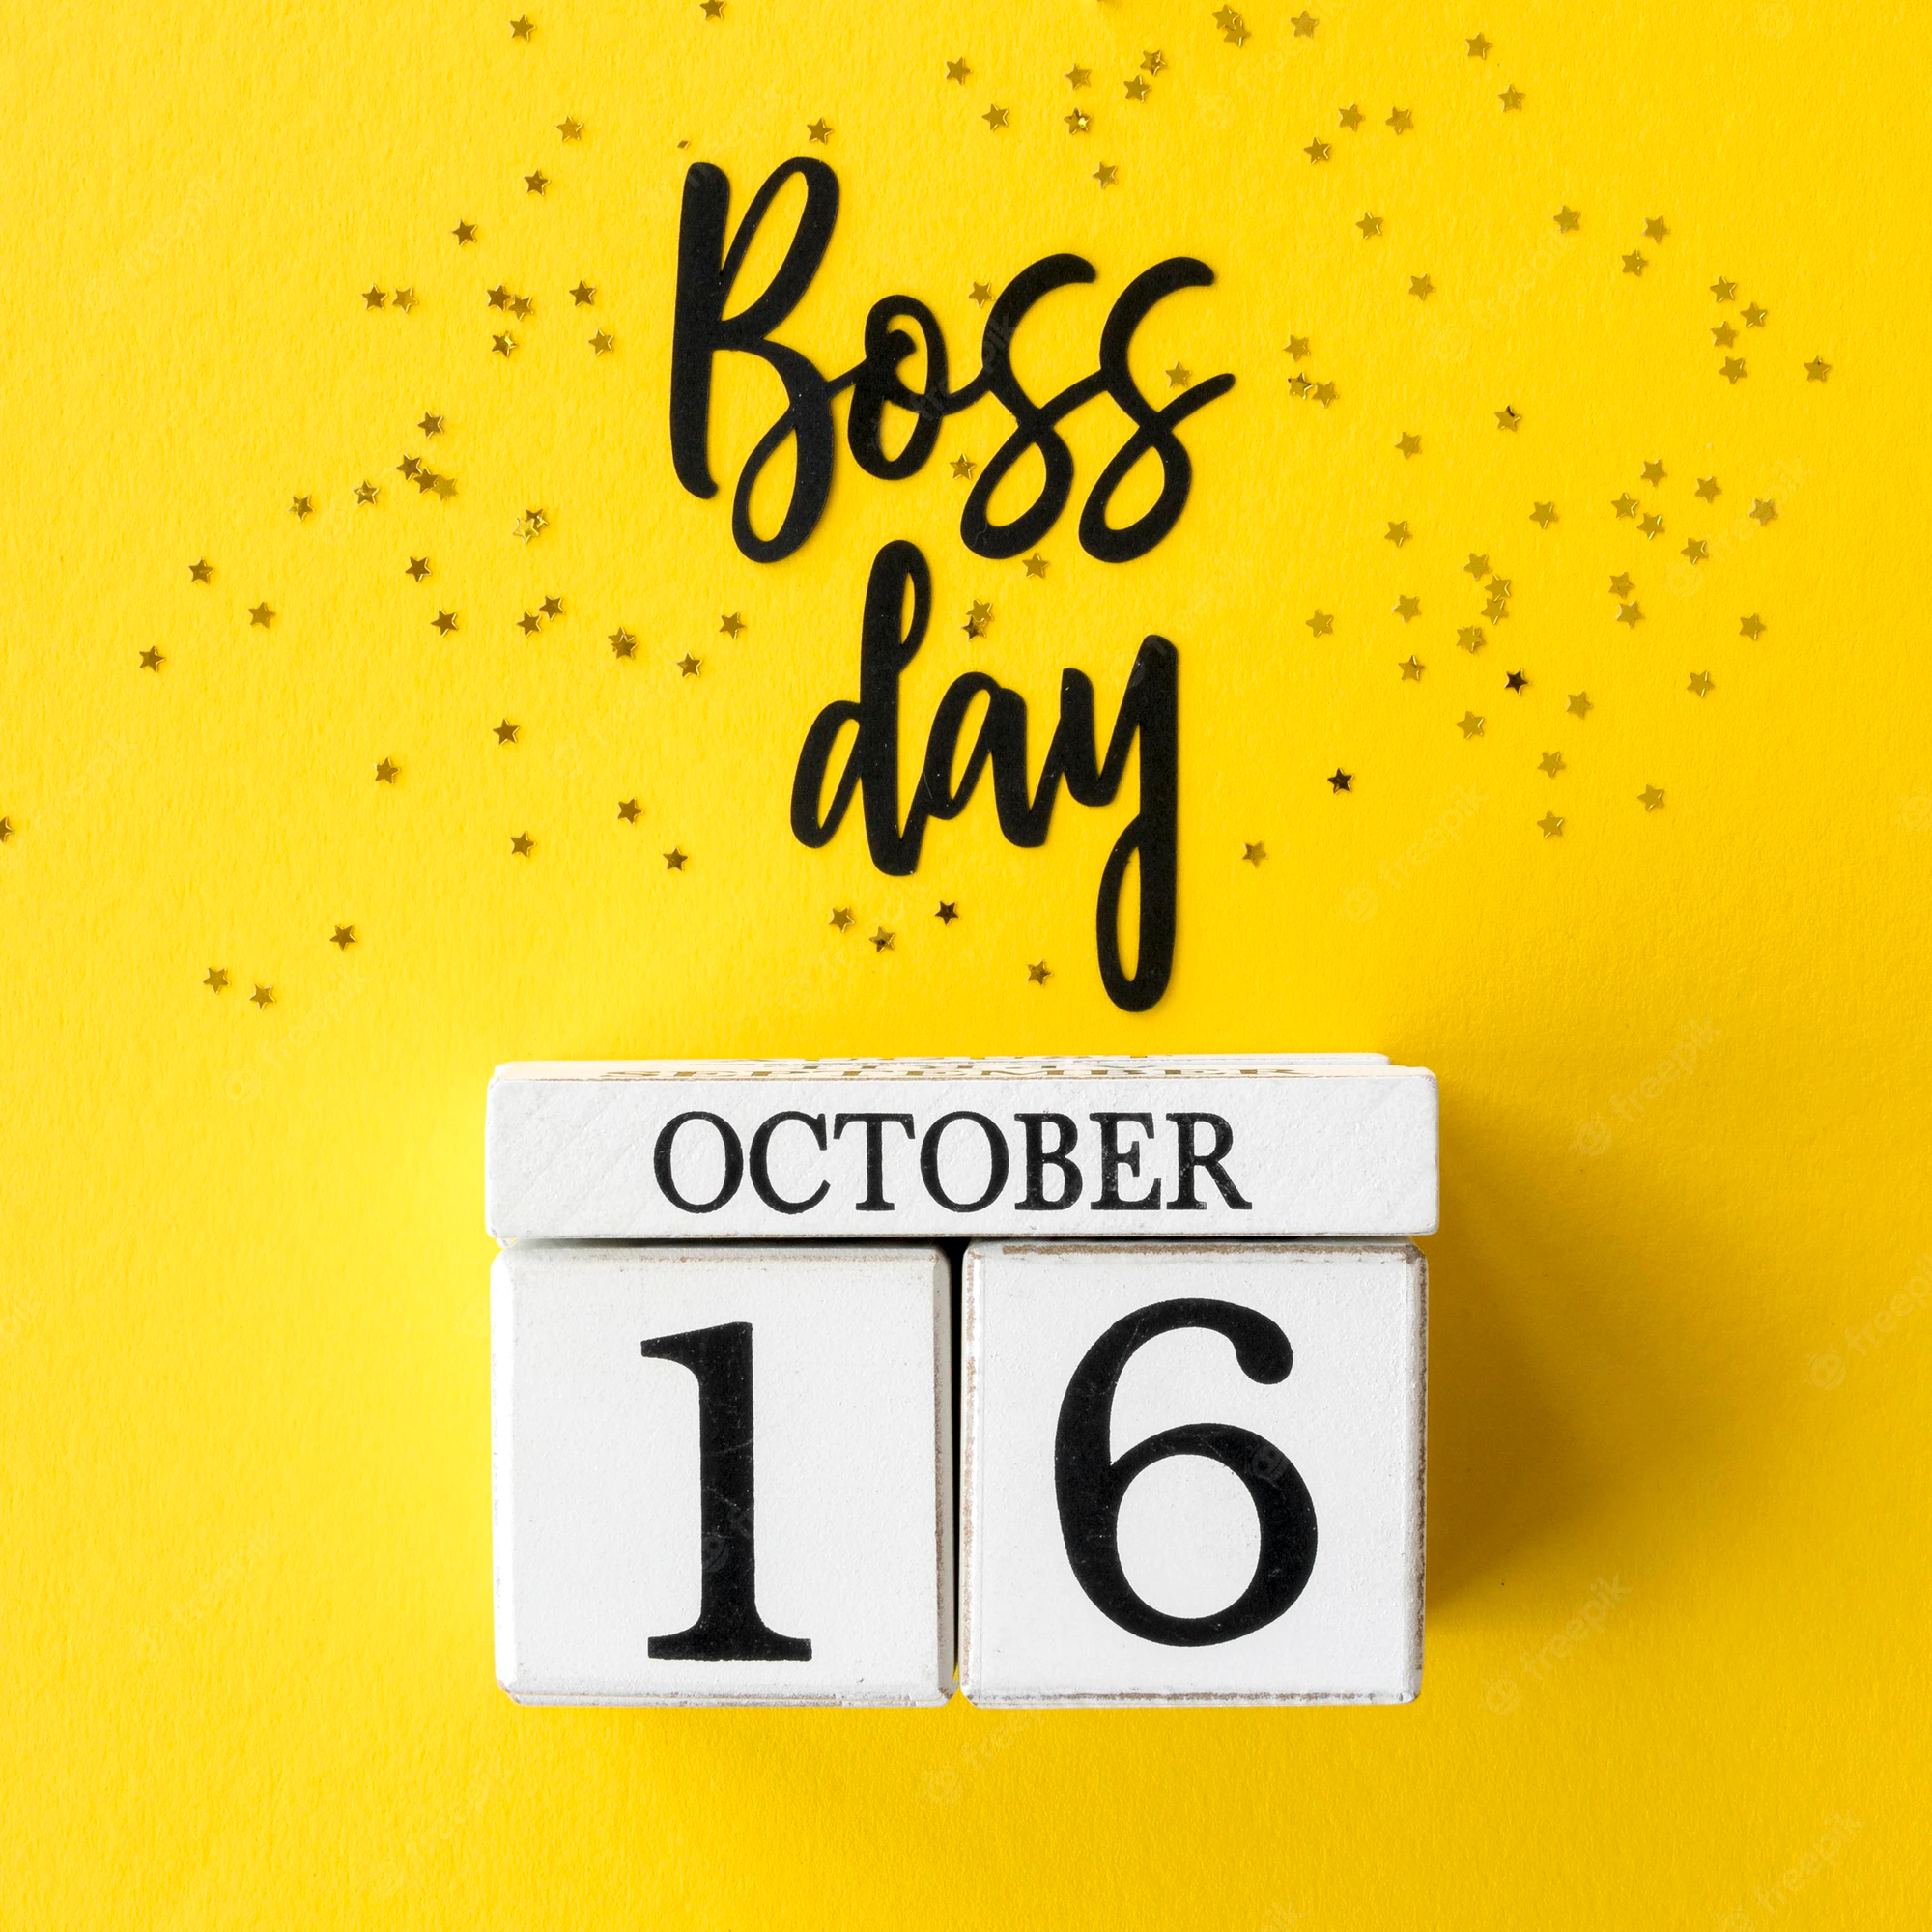 Happy Boss Day 2022 Best Wishes, Quotes, Images, Messages, Greetings